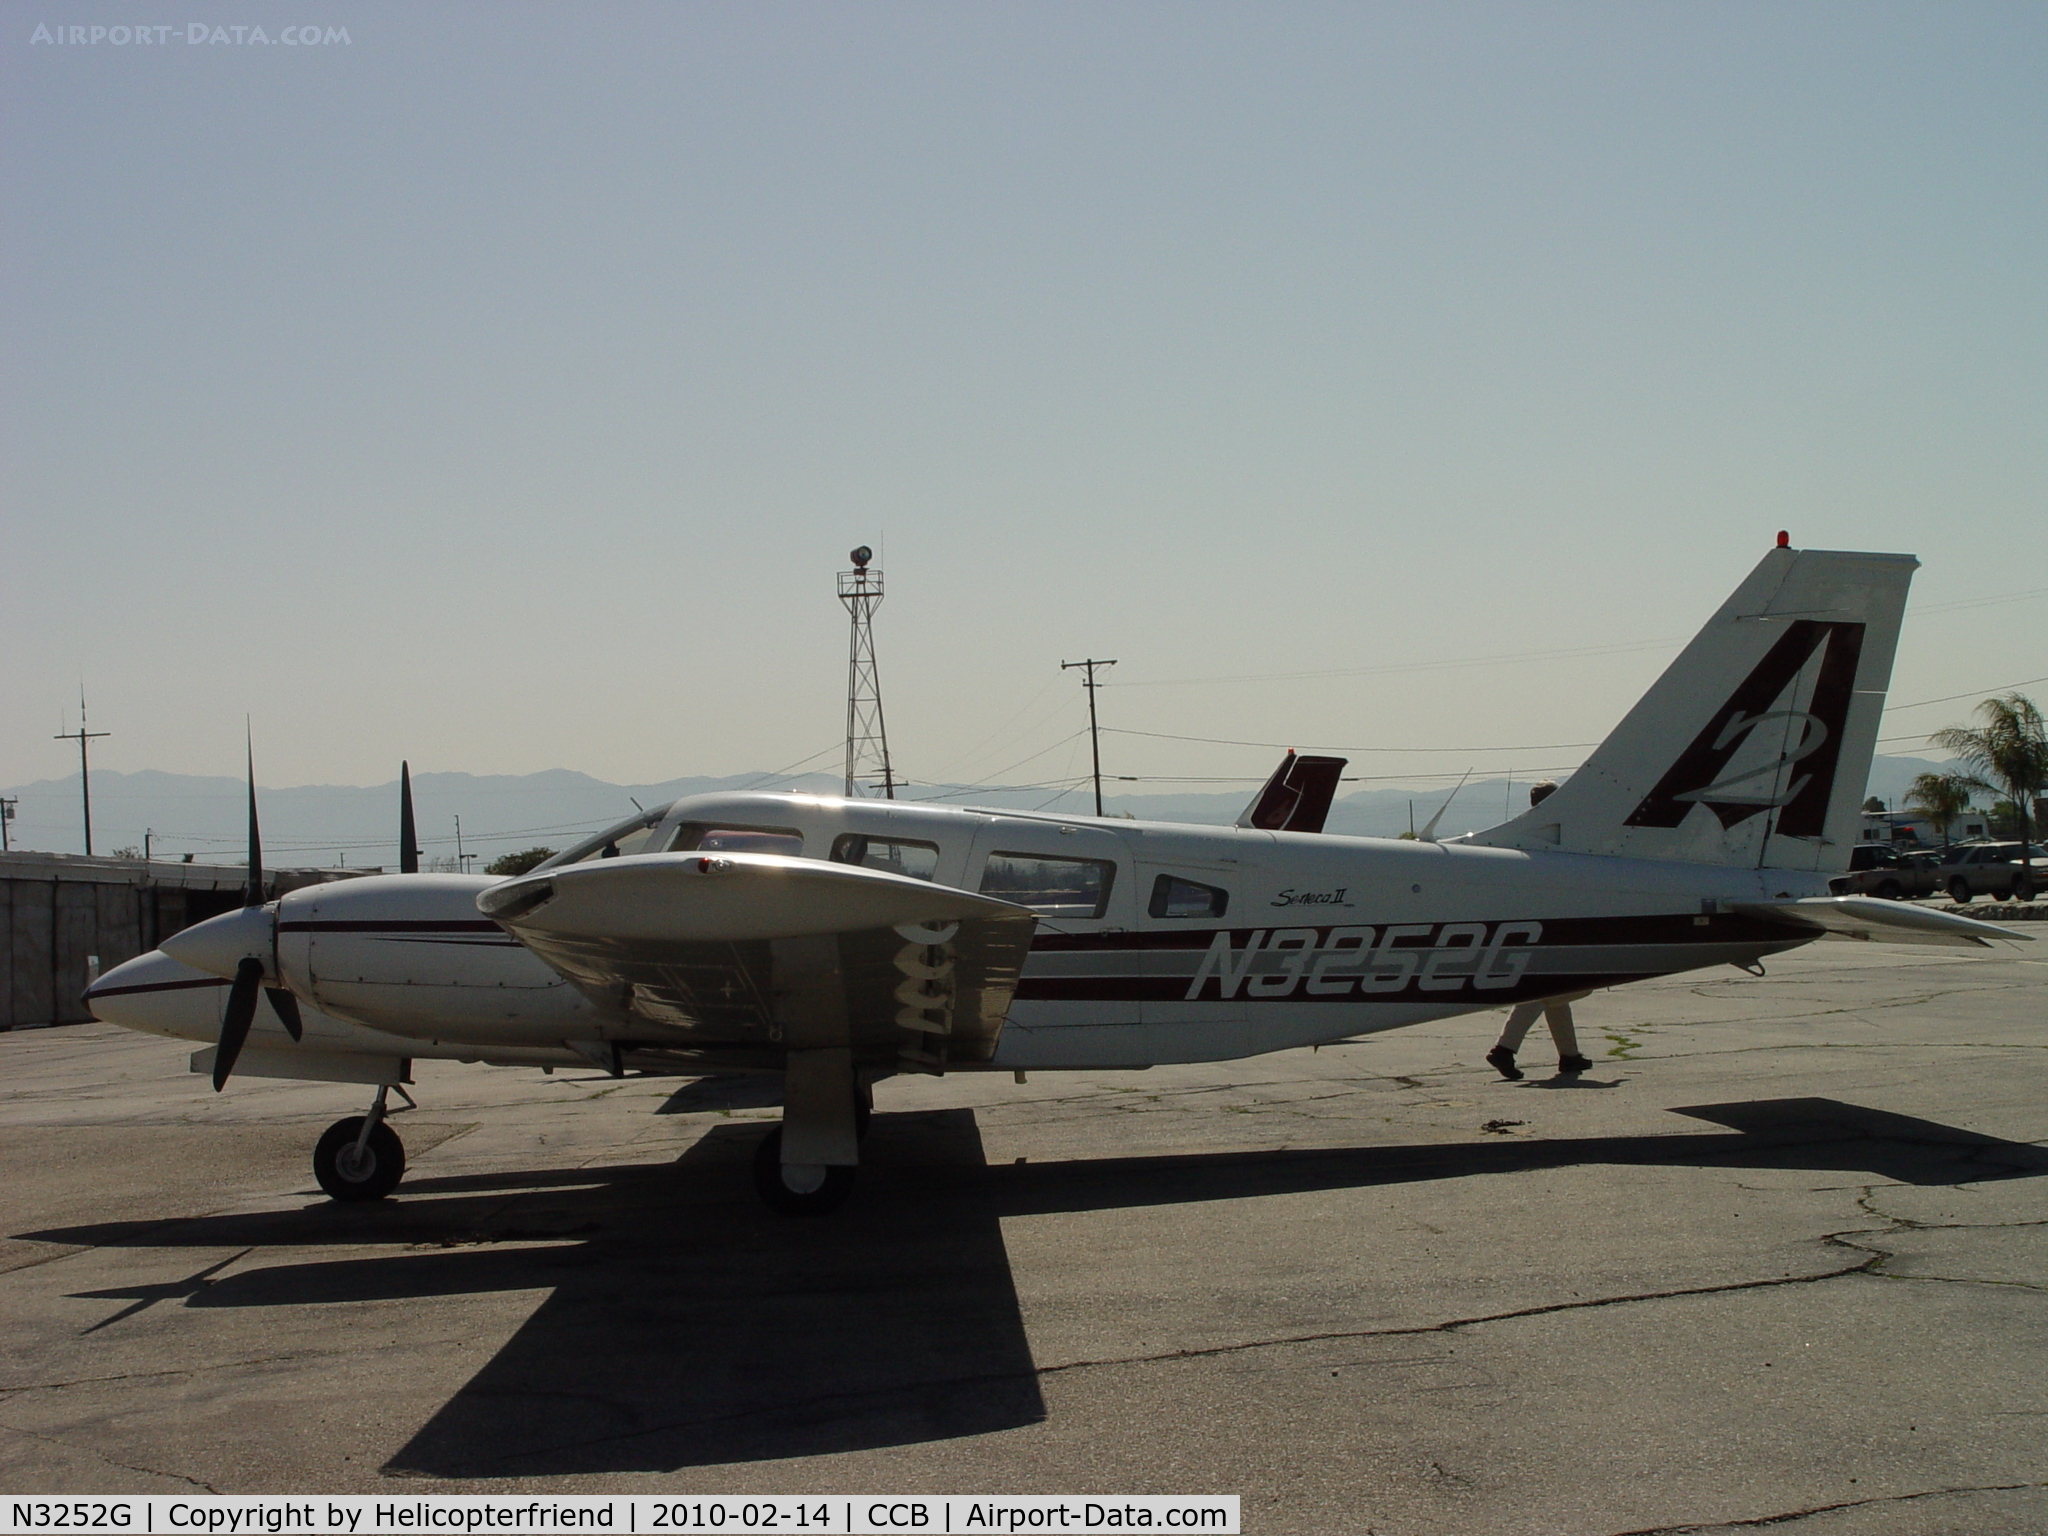 N3252G, Piper PA-34-200T C/N 34-8070316, Parked east of the cafe